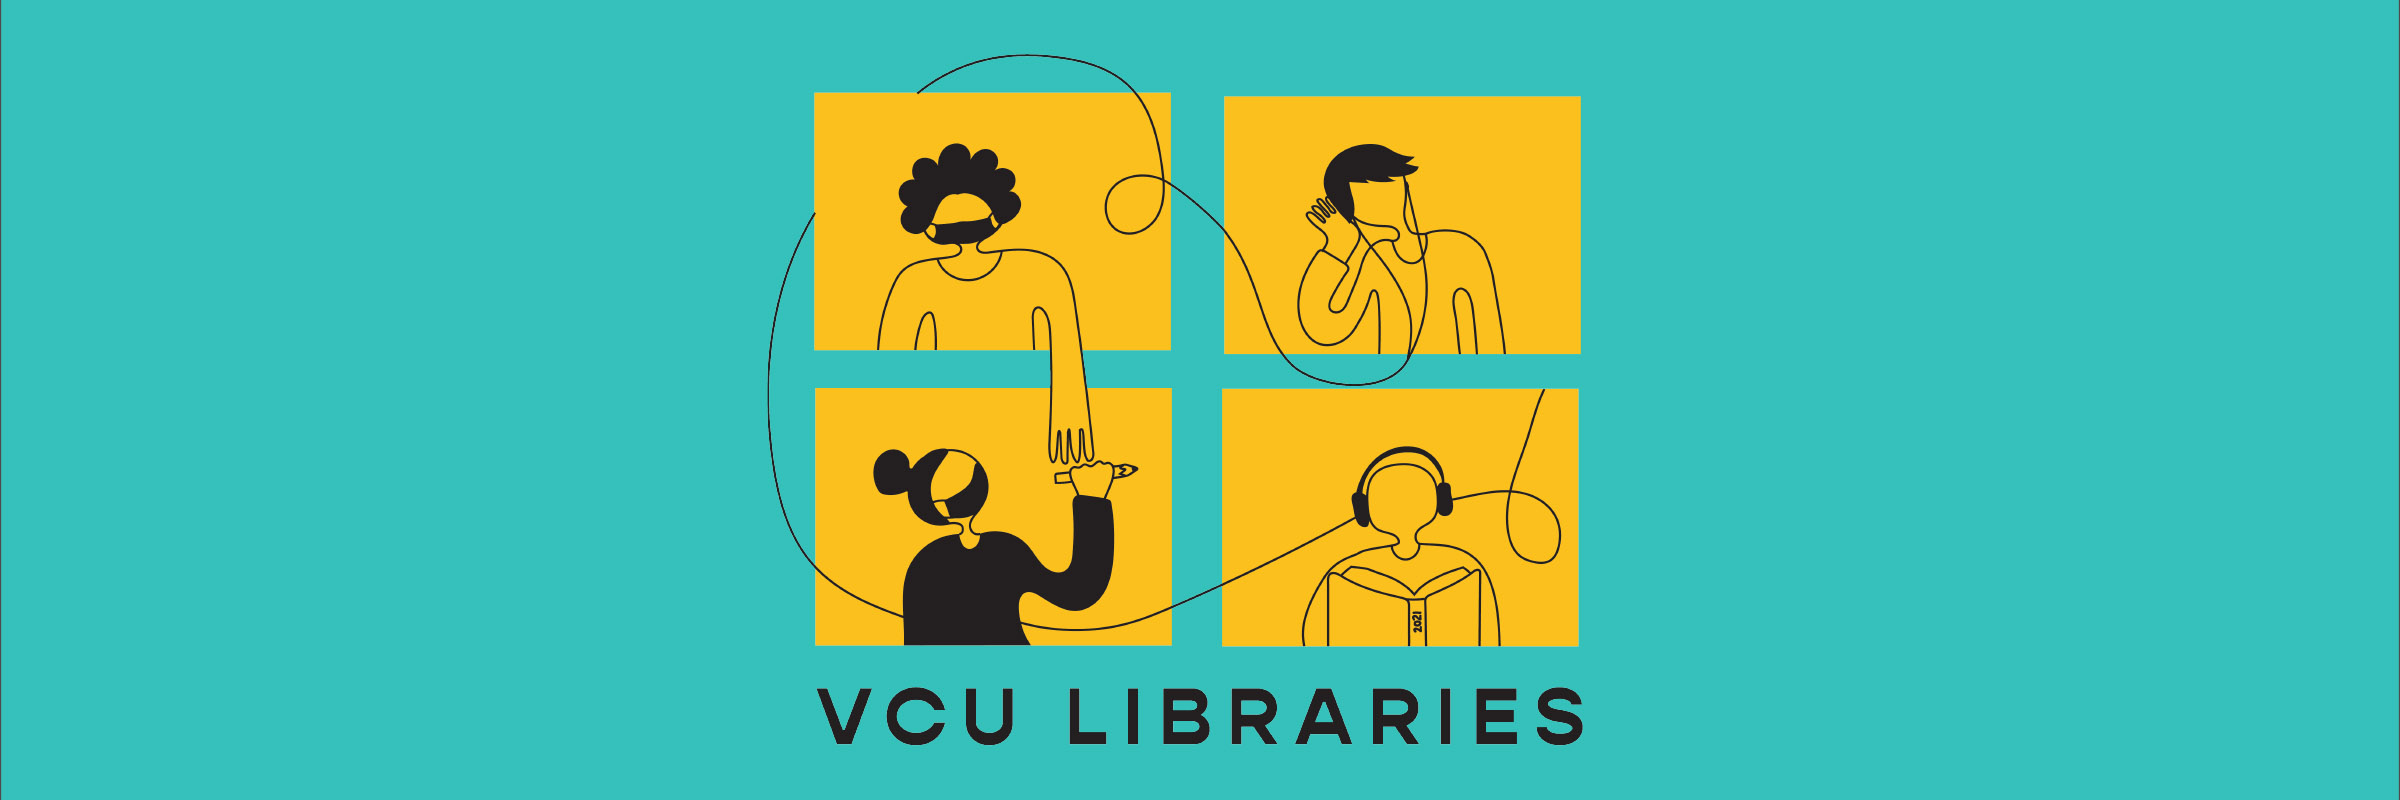 Four line drawing of people connected by headphone wires interacting on four VCU Gold squares on a teal background.